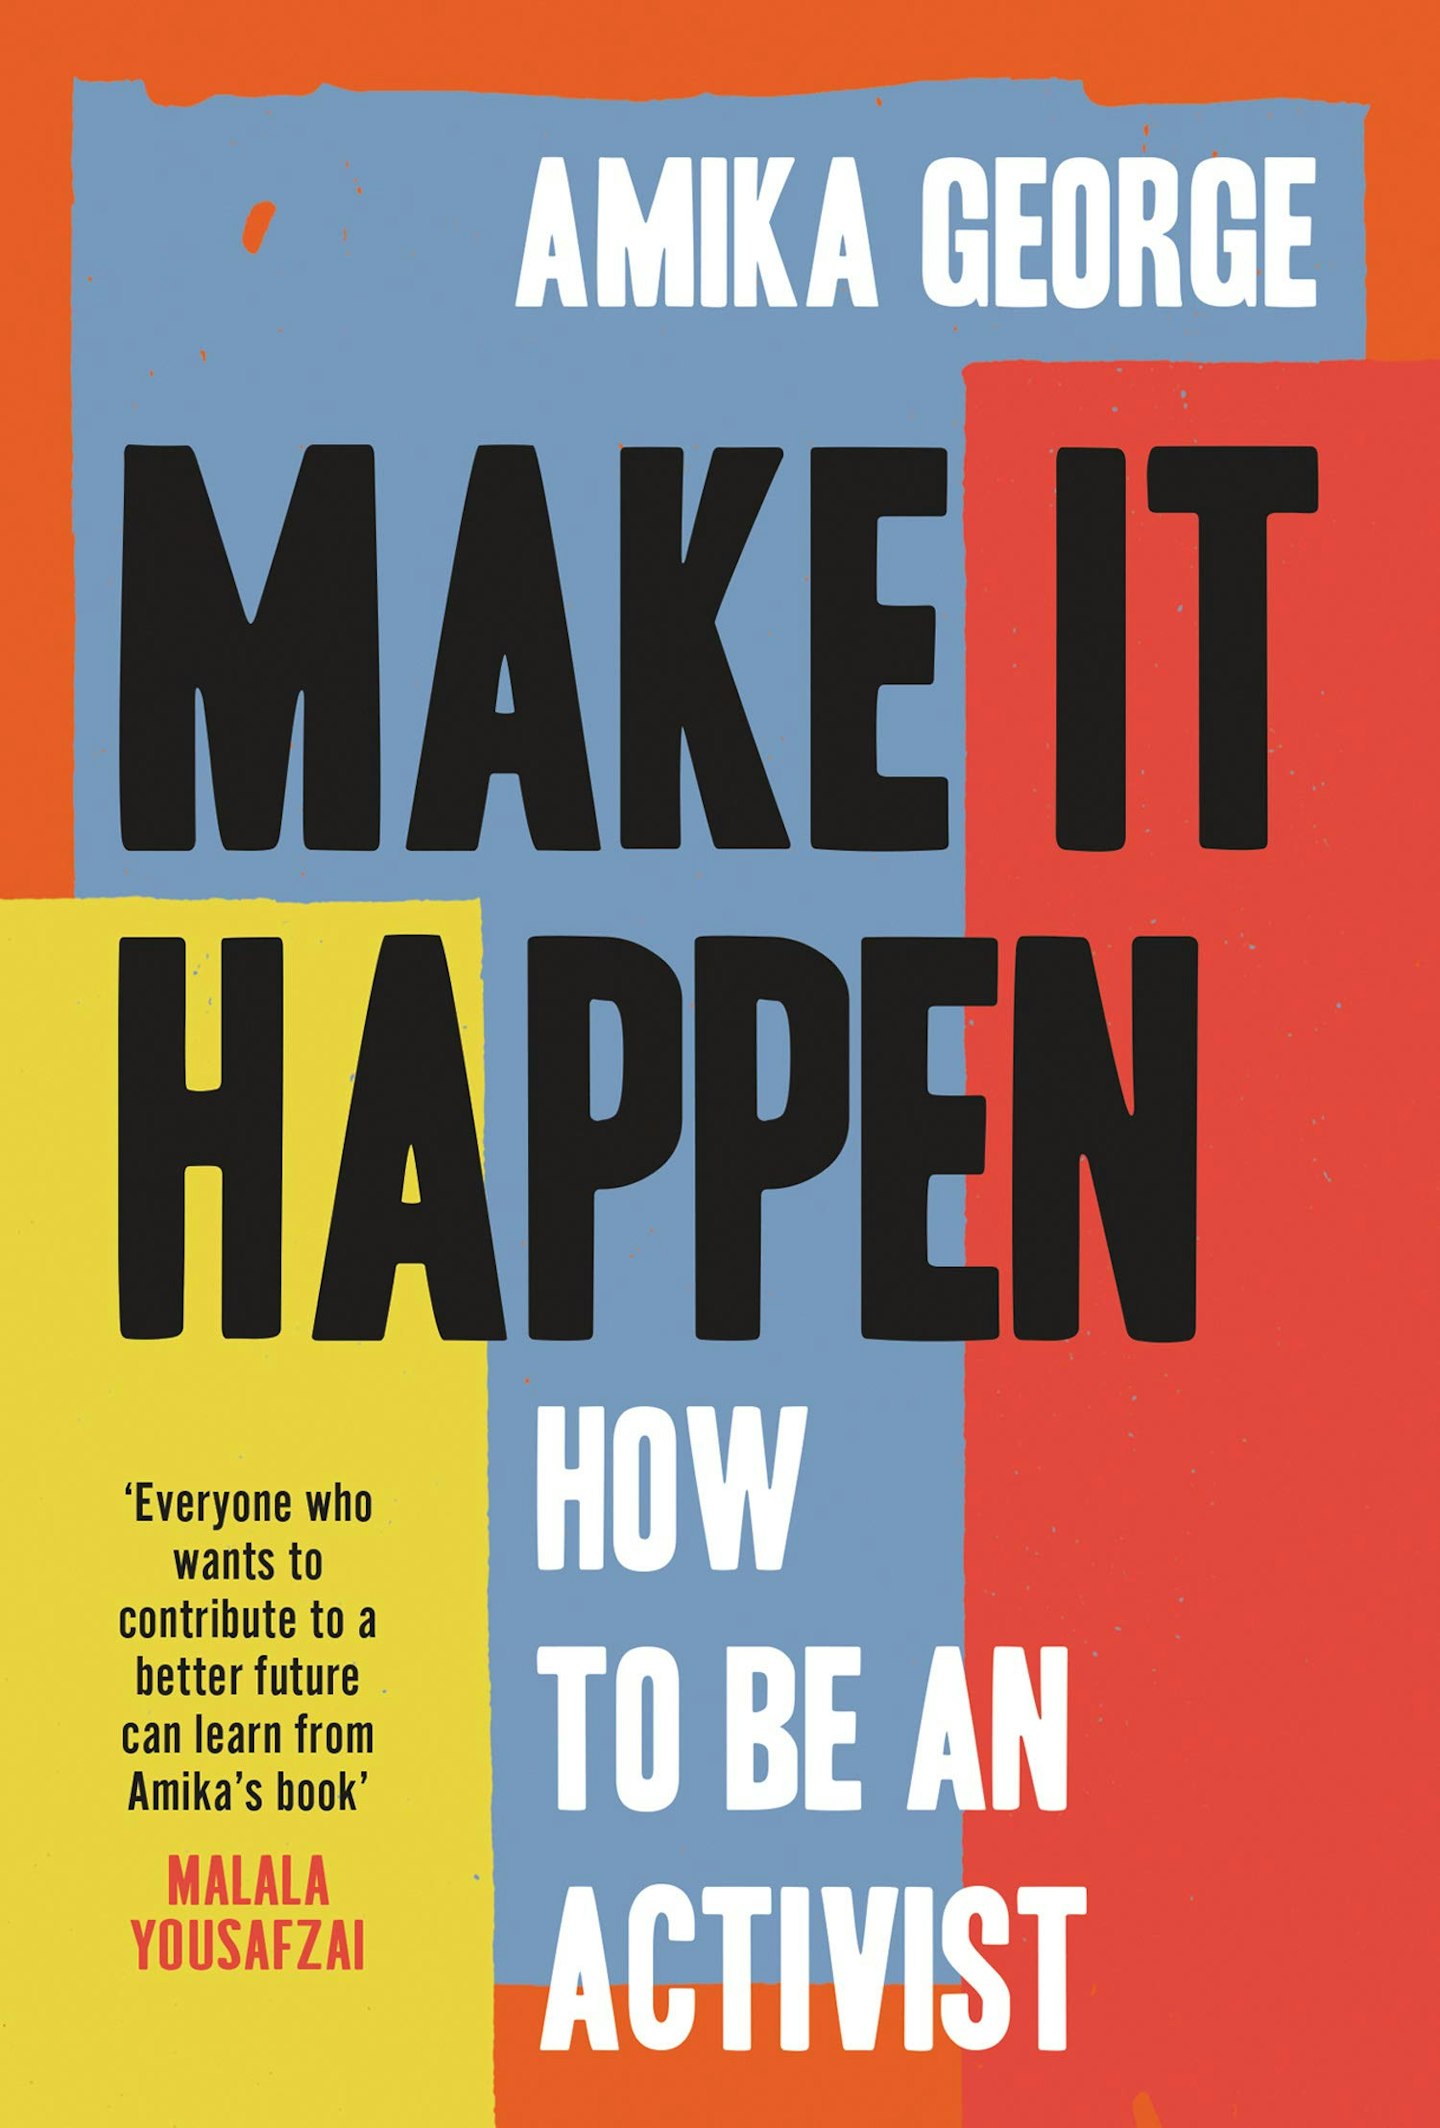 Make it Happen: How to be an Activist, by Amika George